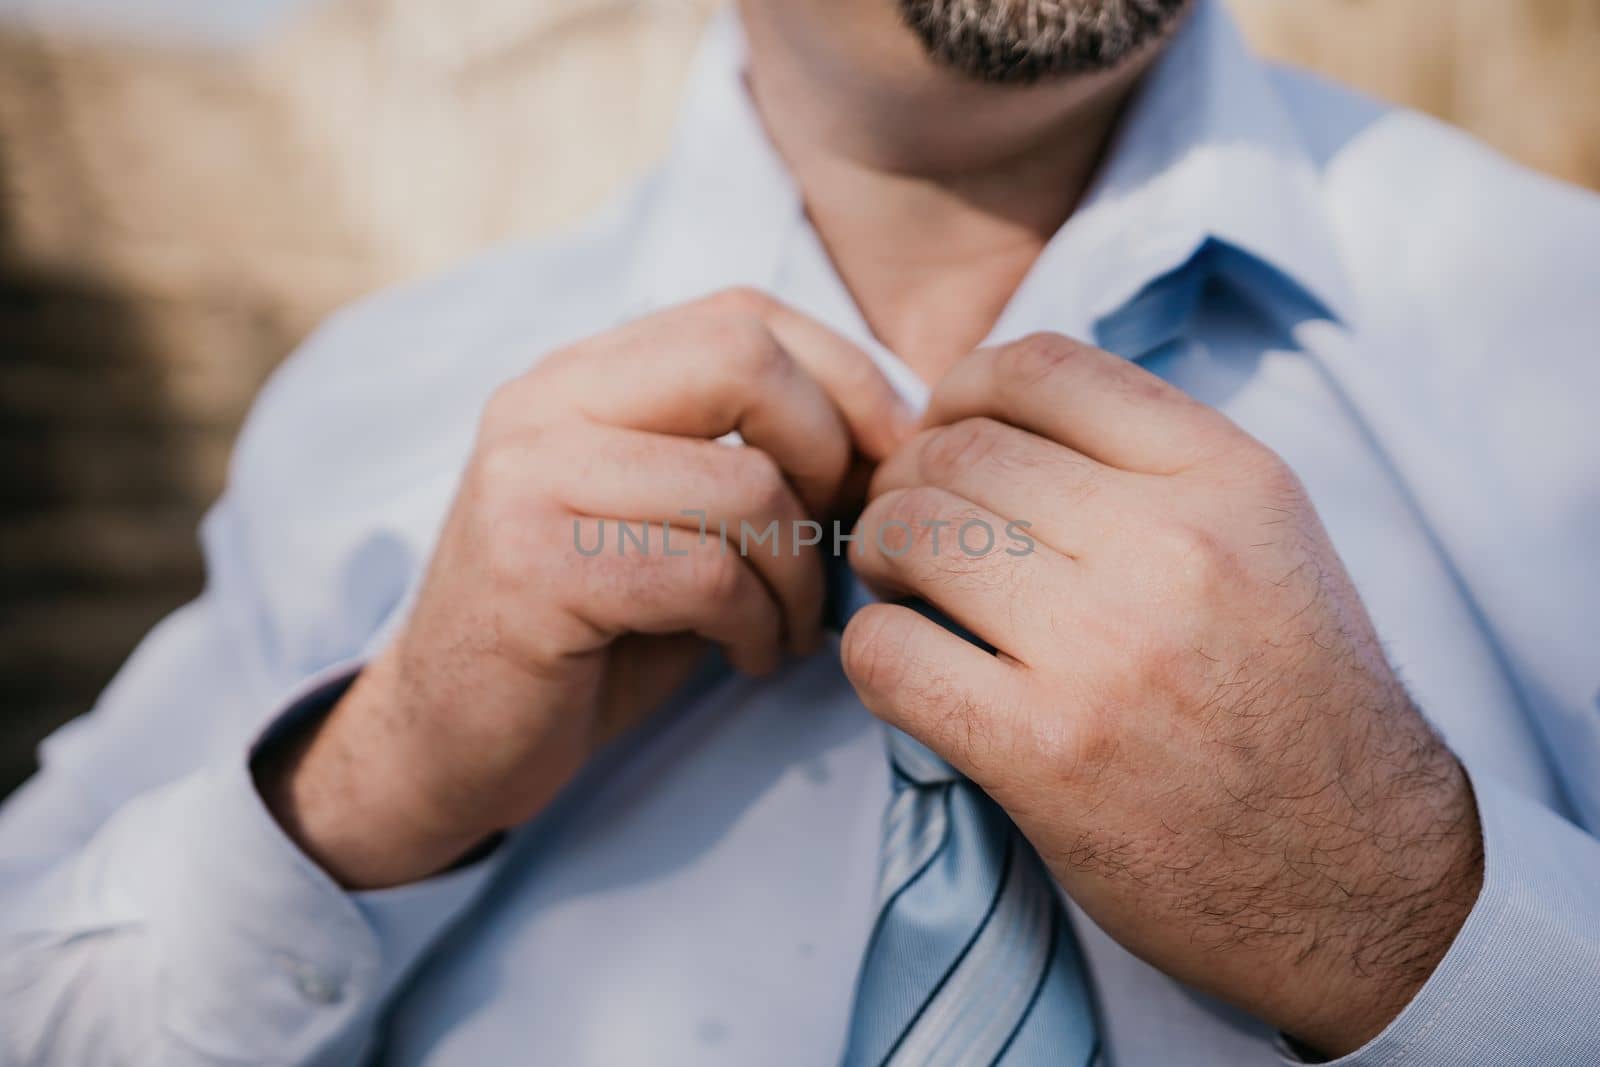 Close up of Man Adjusting Tie of Suit. Businessman in white shirt straightens his tie, close-up.